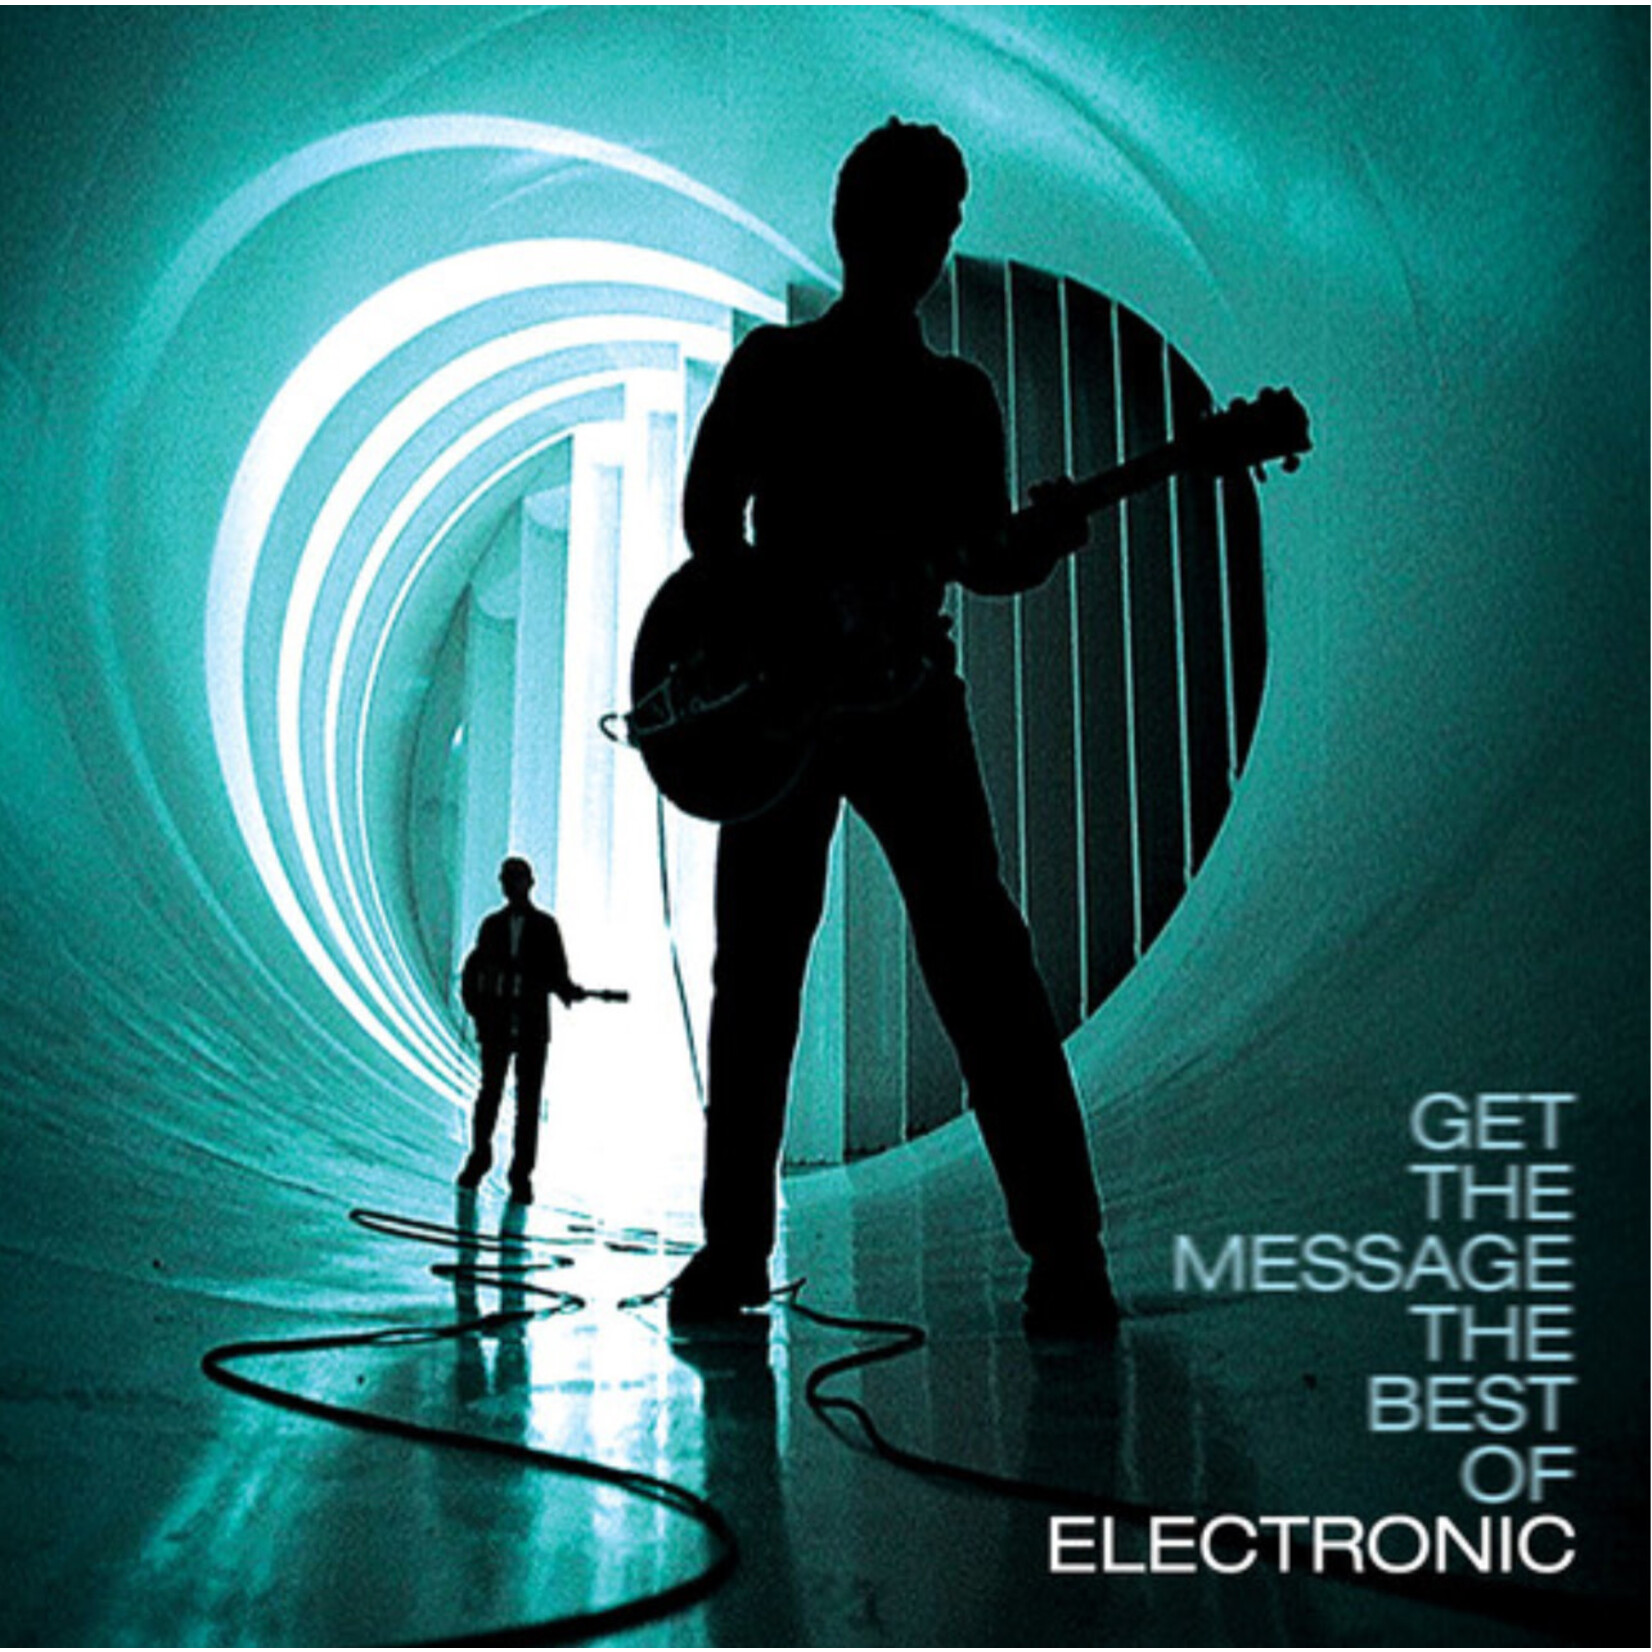 Electronic - Get The Message The best Of Electronic - WB453823 - Vinyl LP (NEW)